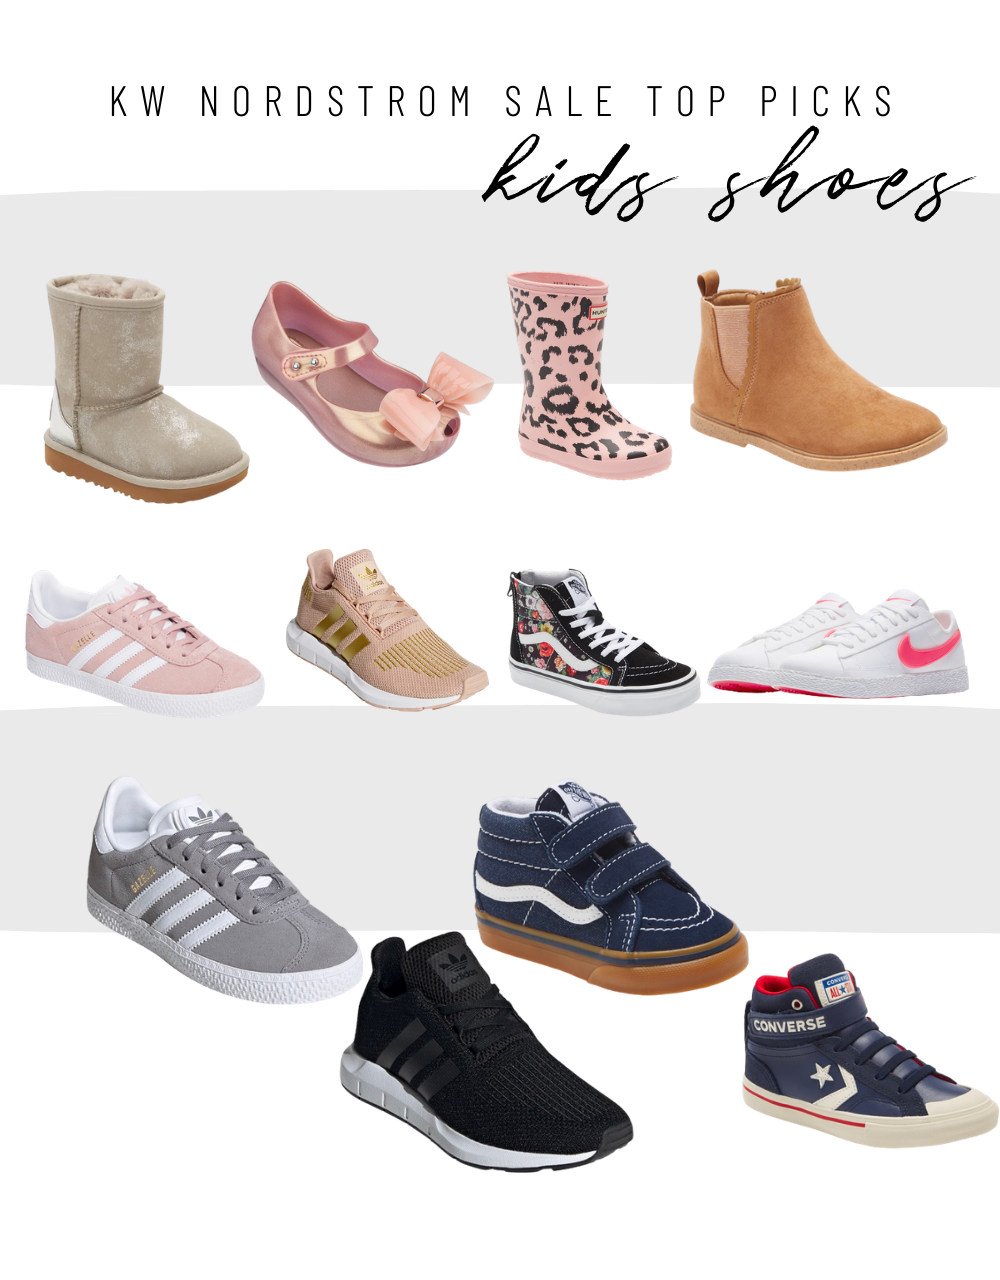 Nordstrom Anniversary Sale 2020 kids shoes